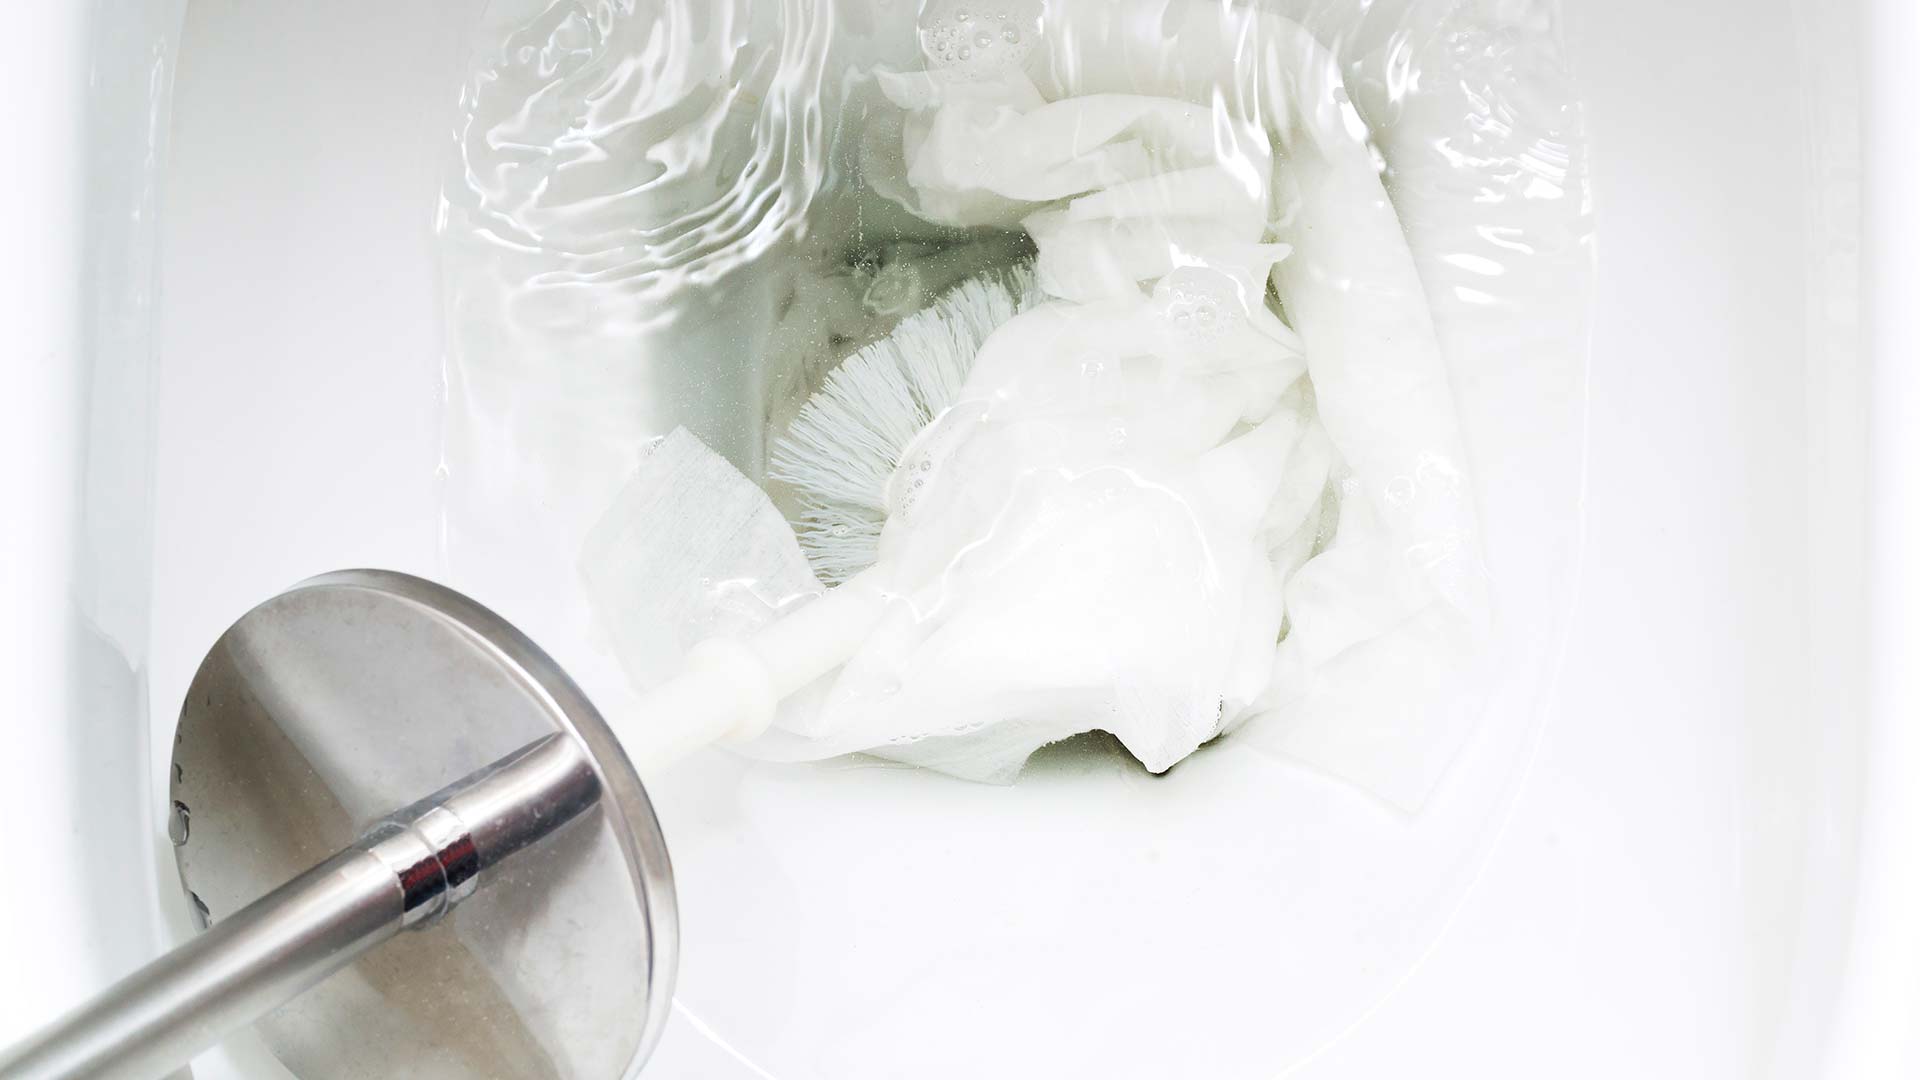 Are Flushable Wipes Harming Your Plumbing?